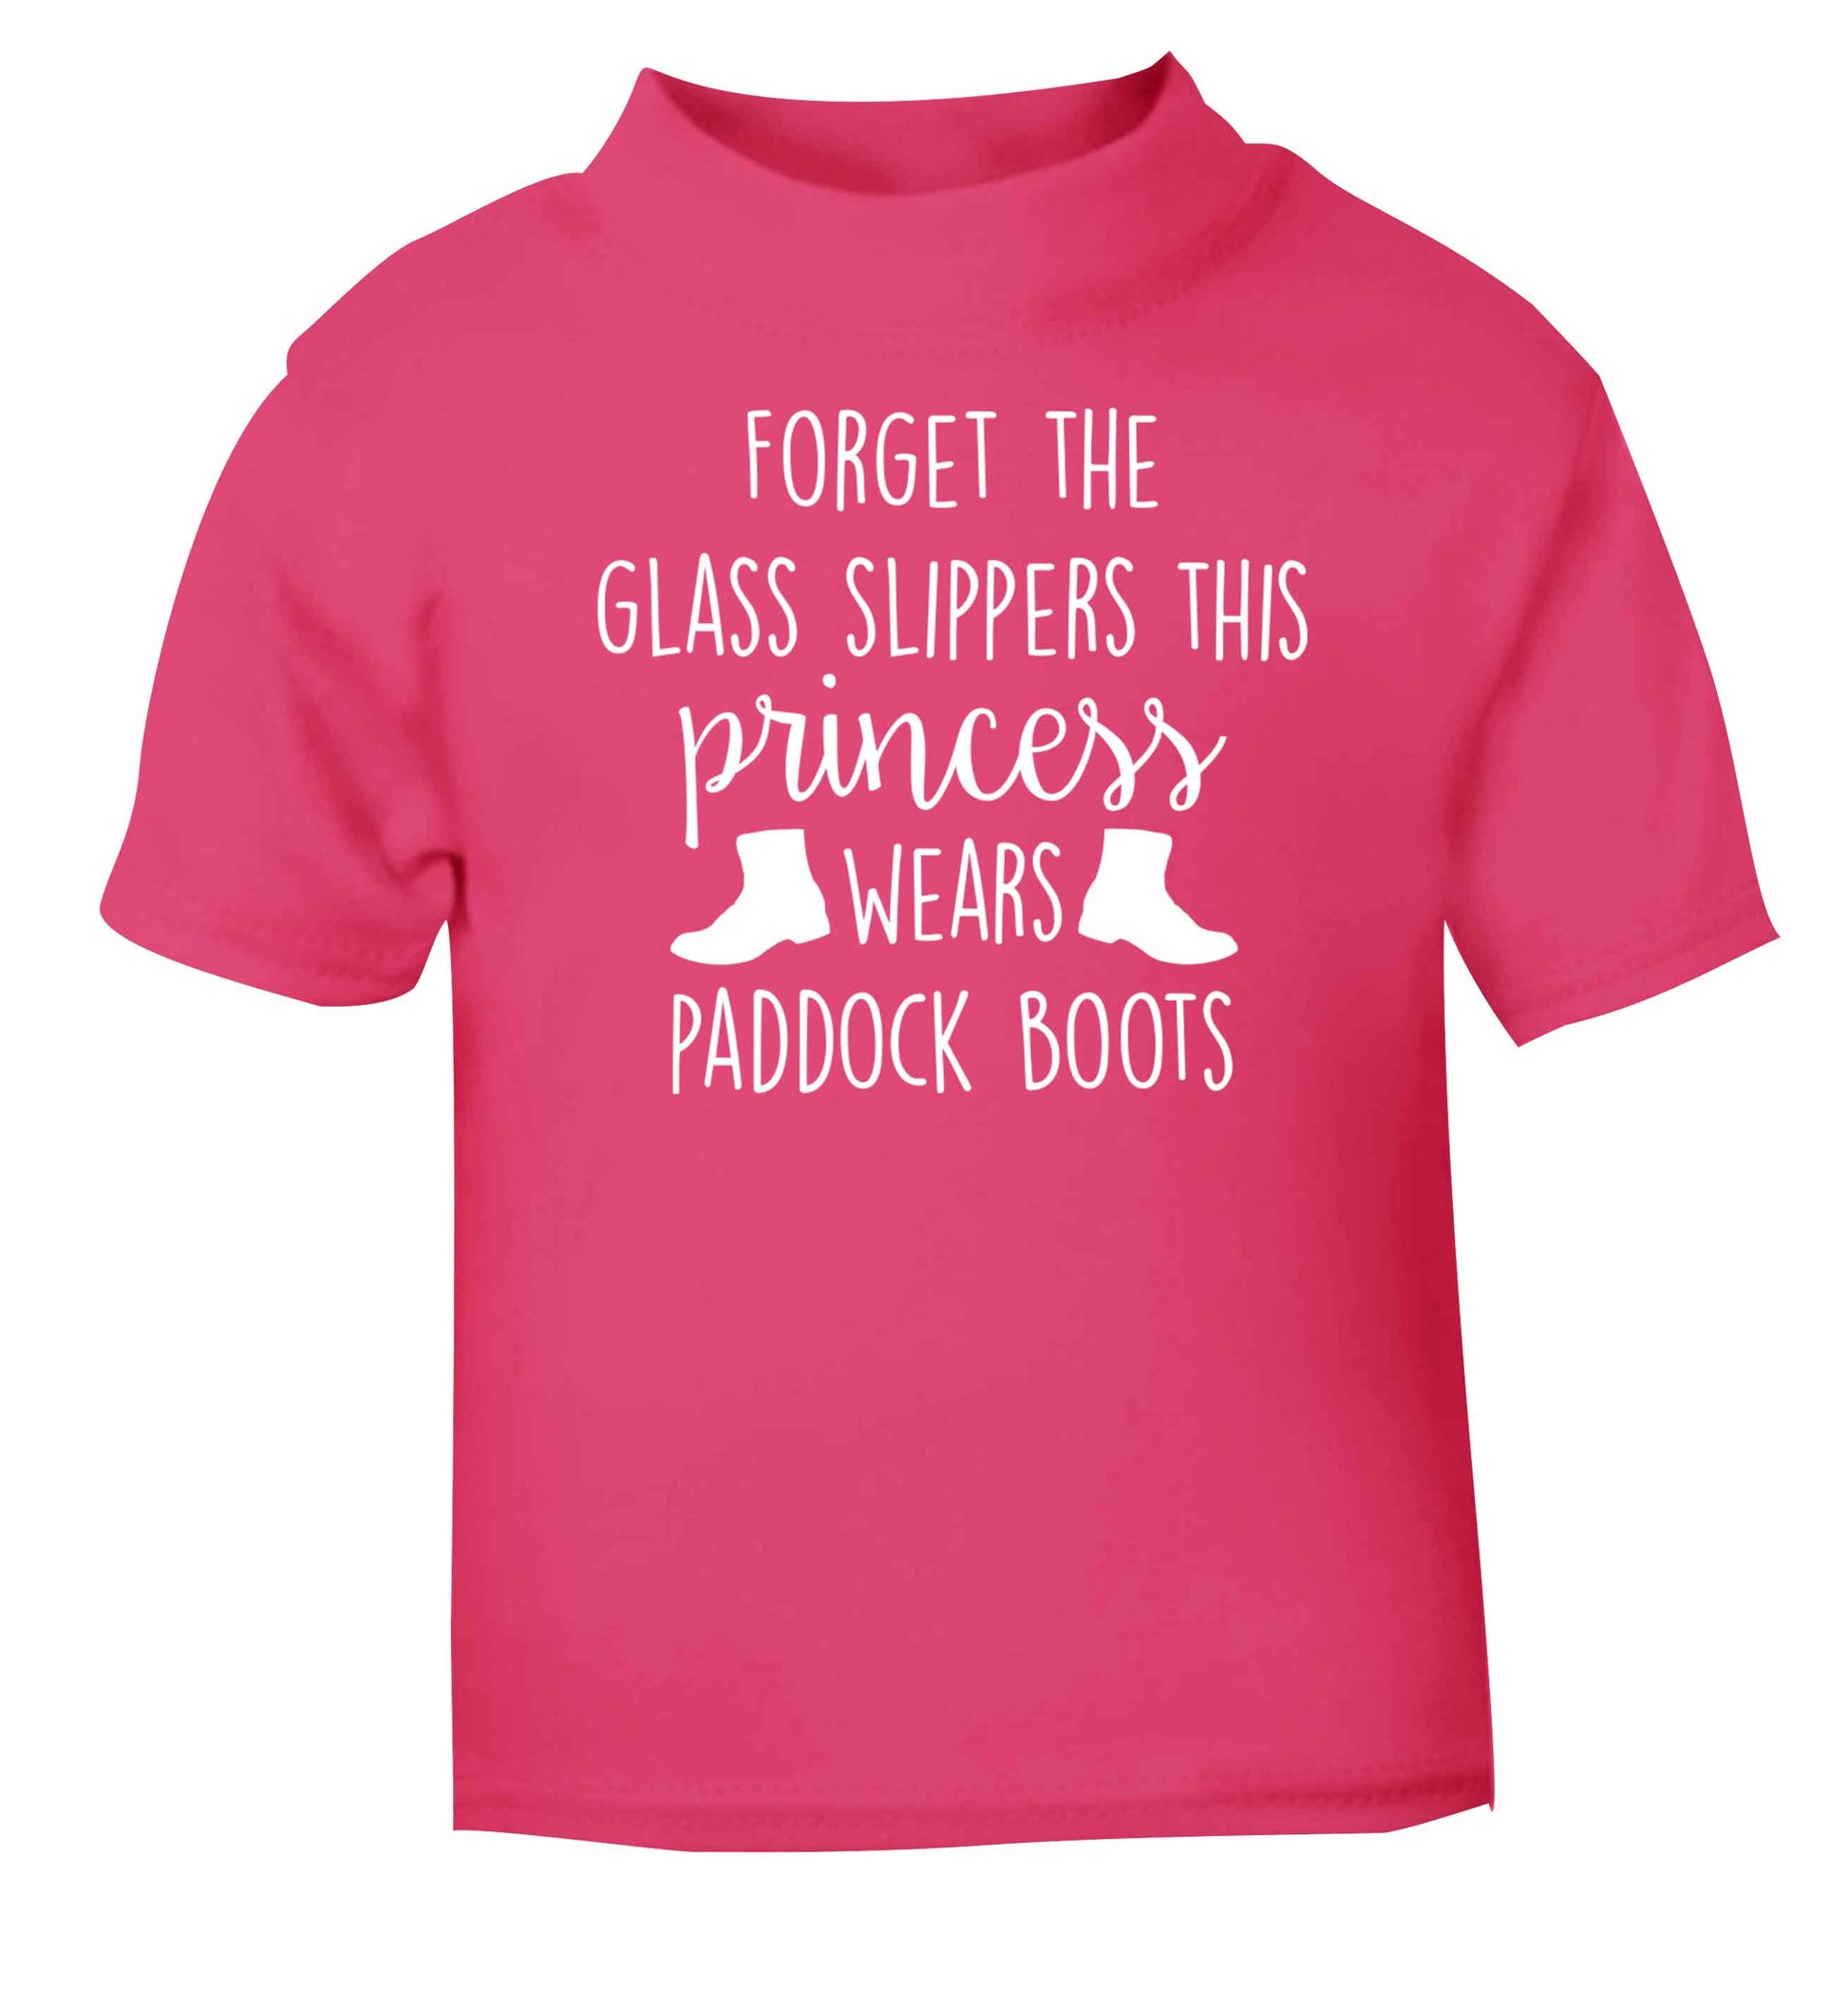 Forget the glass slippers this princess wears paddock boots pink baby toddler Tshirt 2 Years